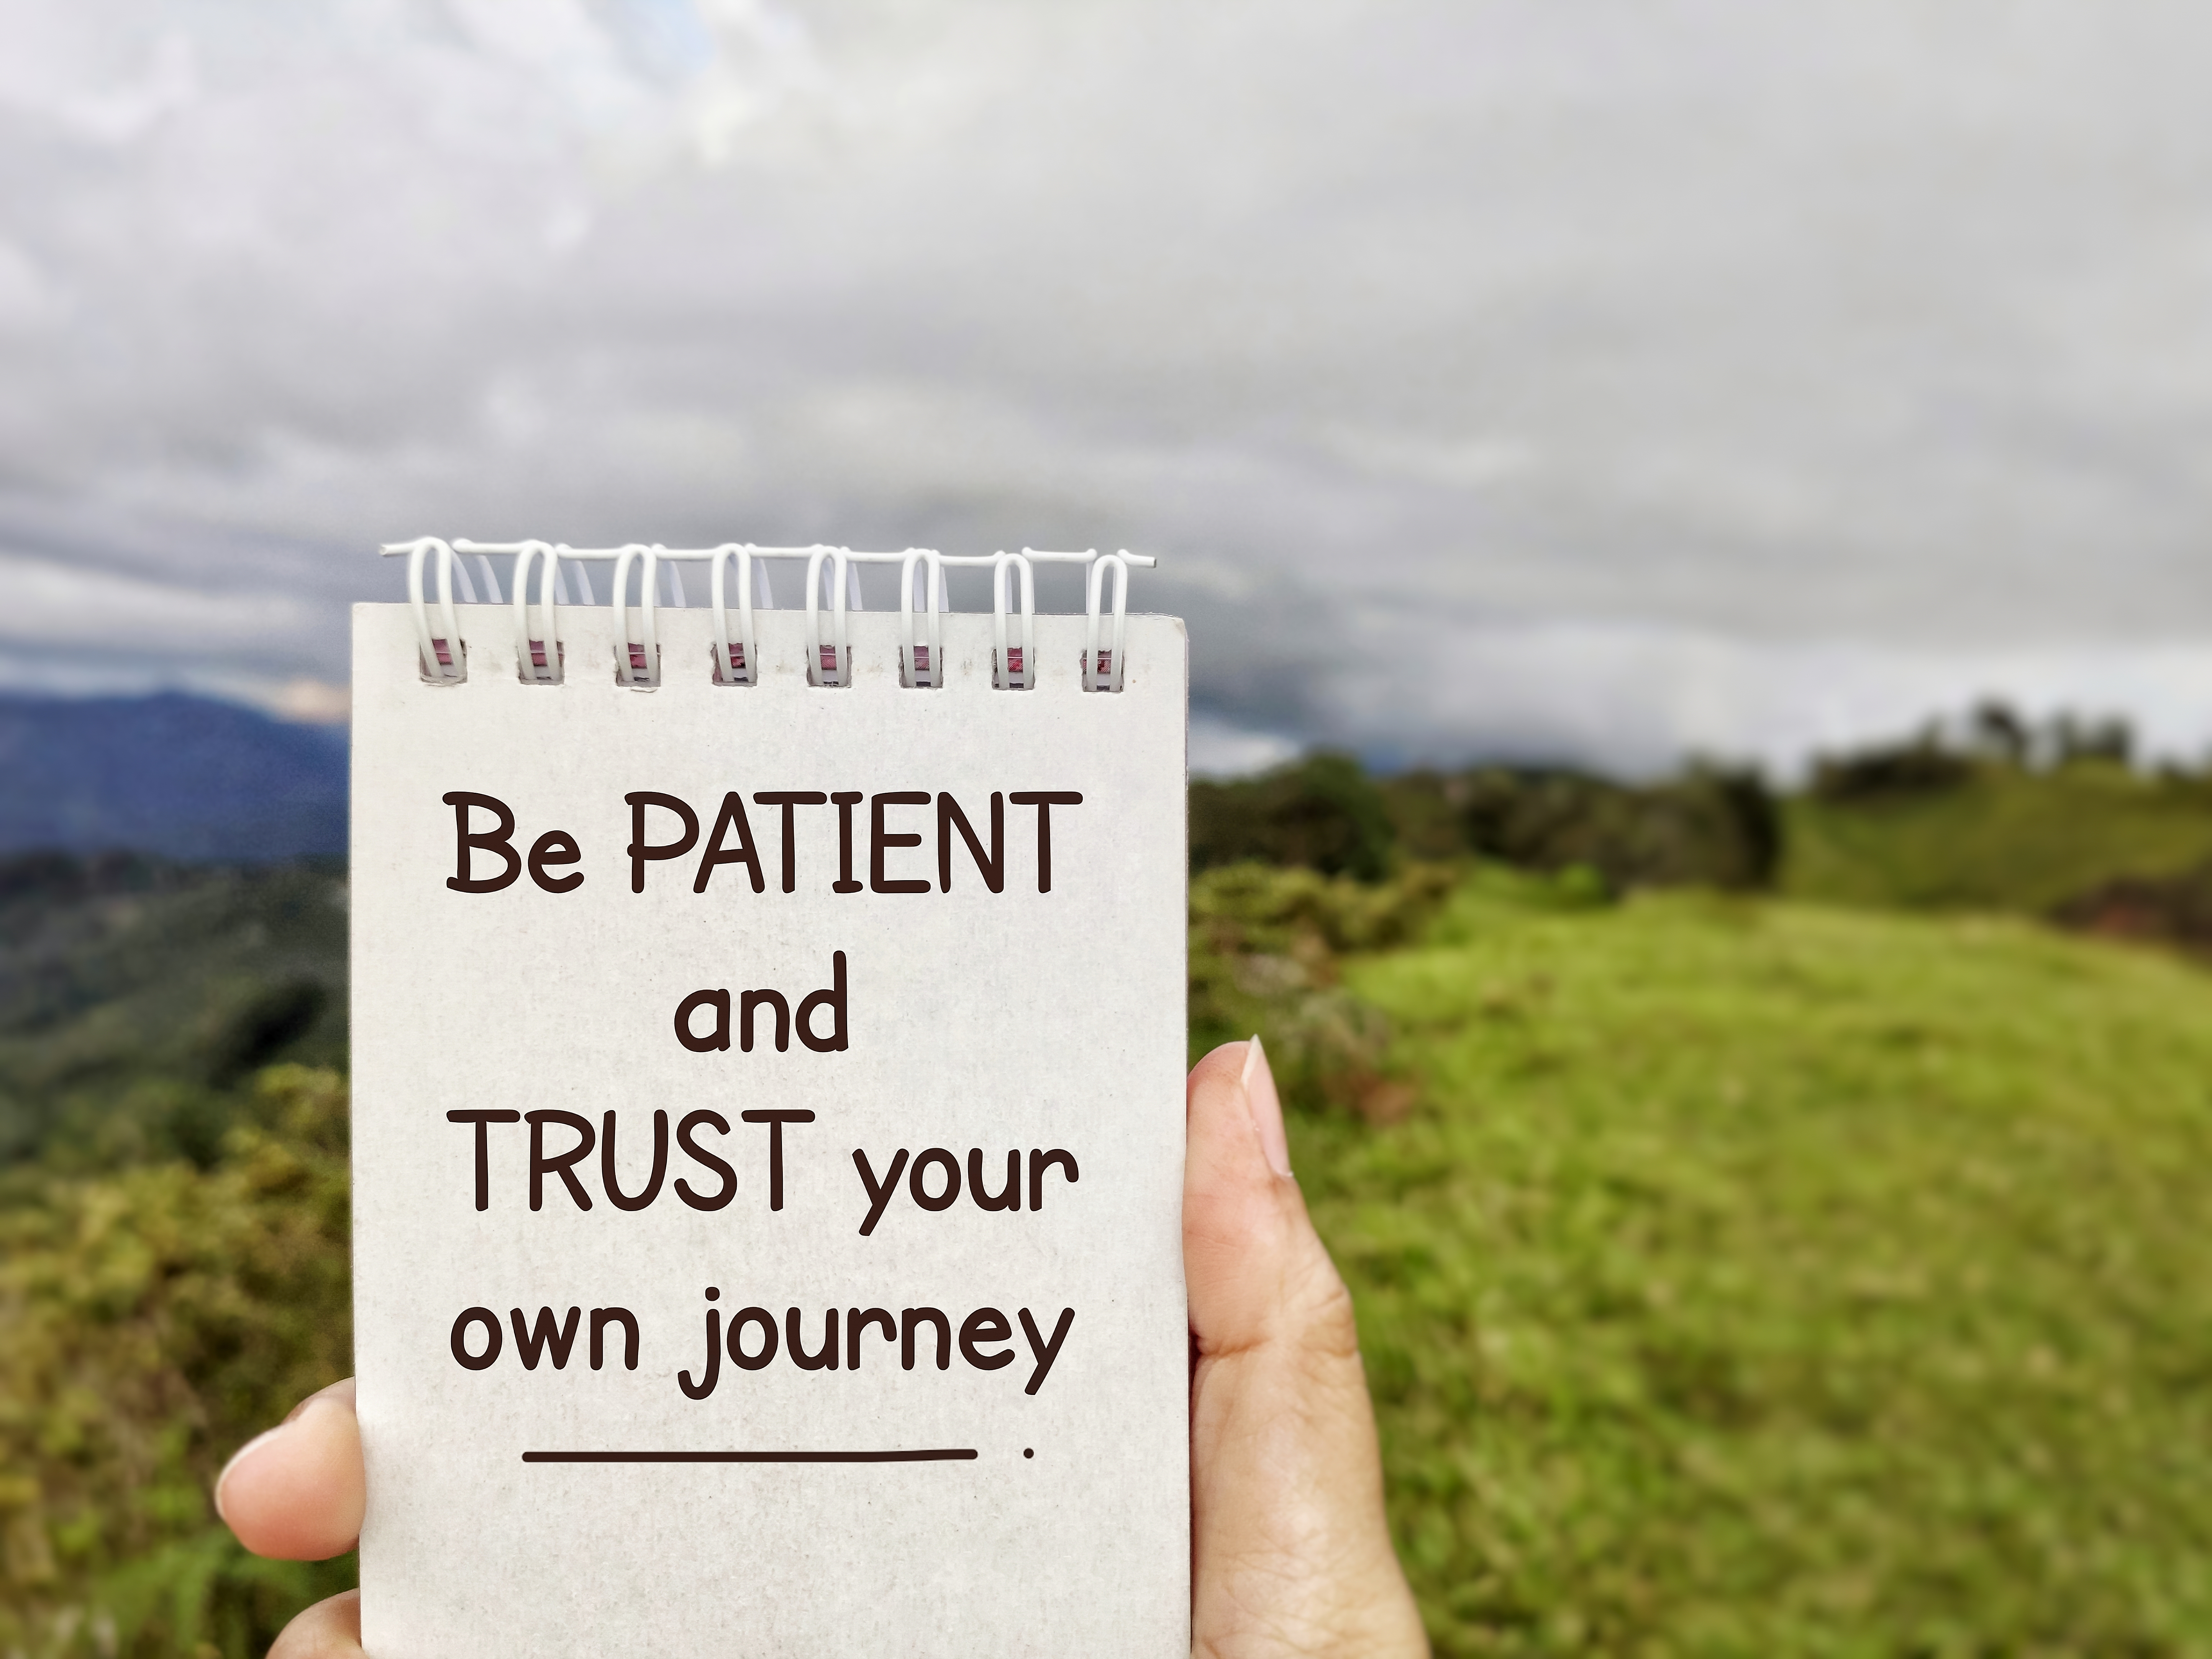 Be Patient and trust your journey